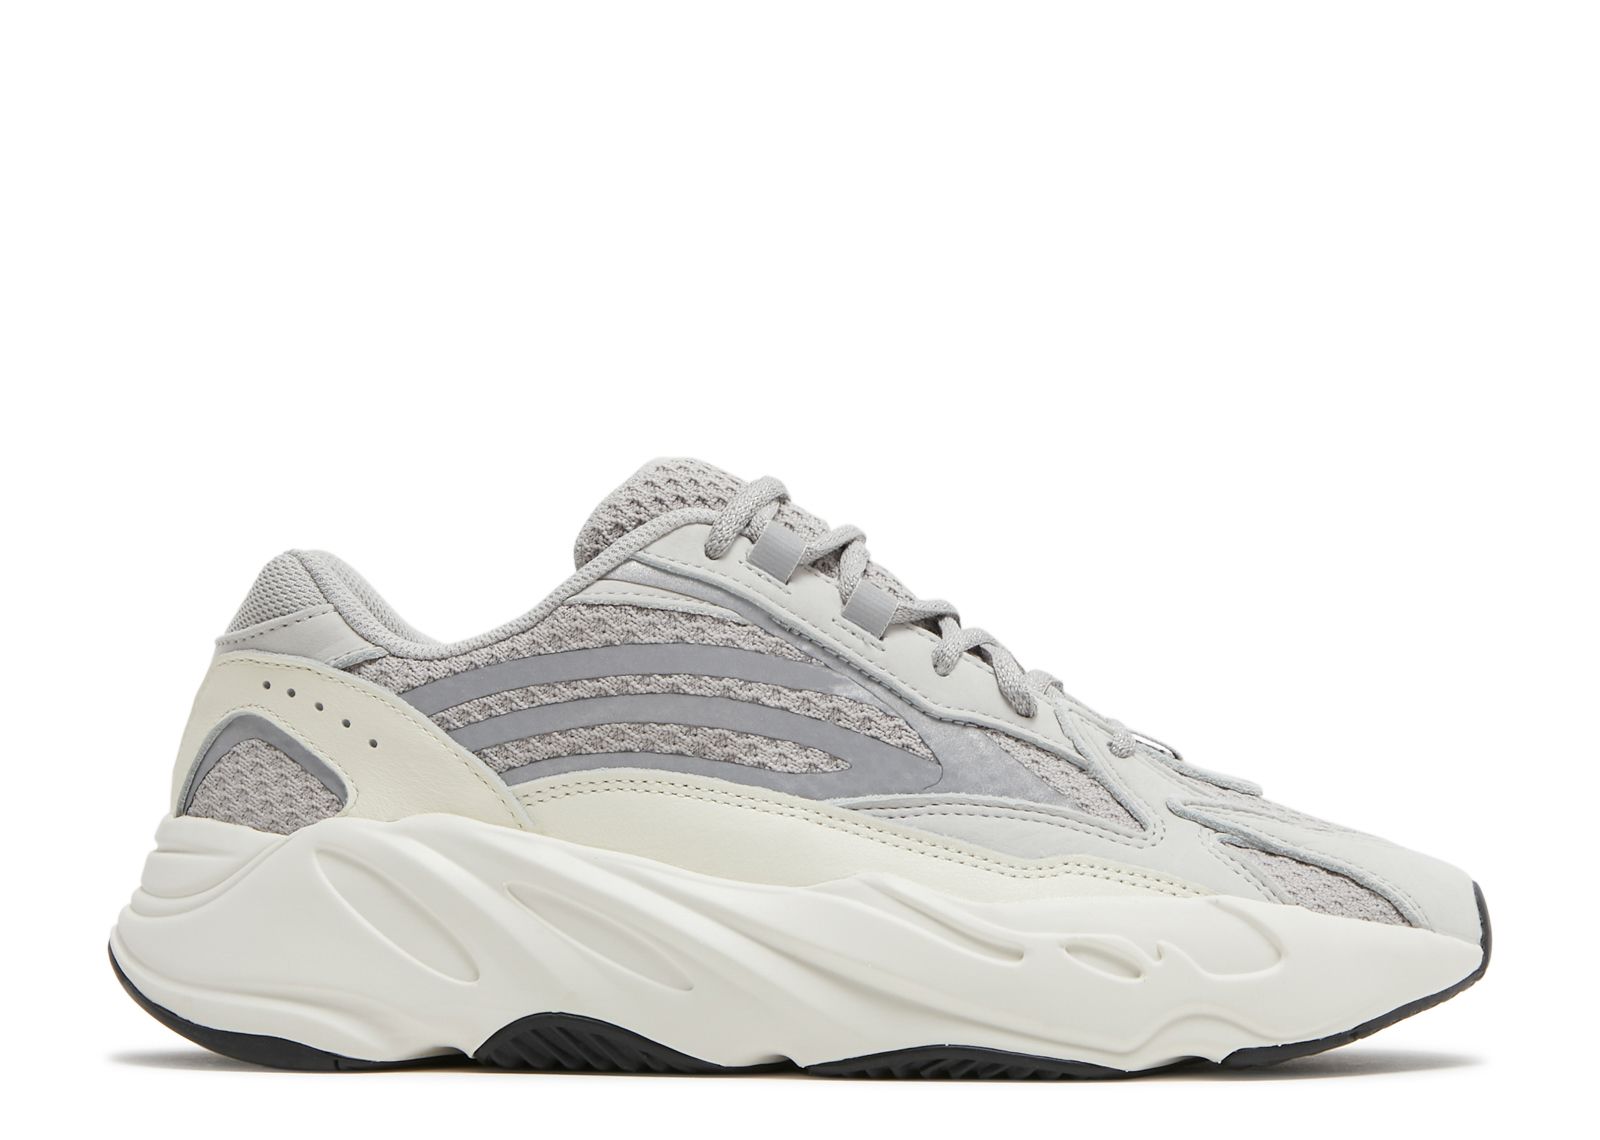 yeezy 700 size guide